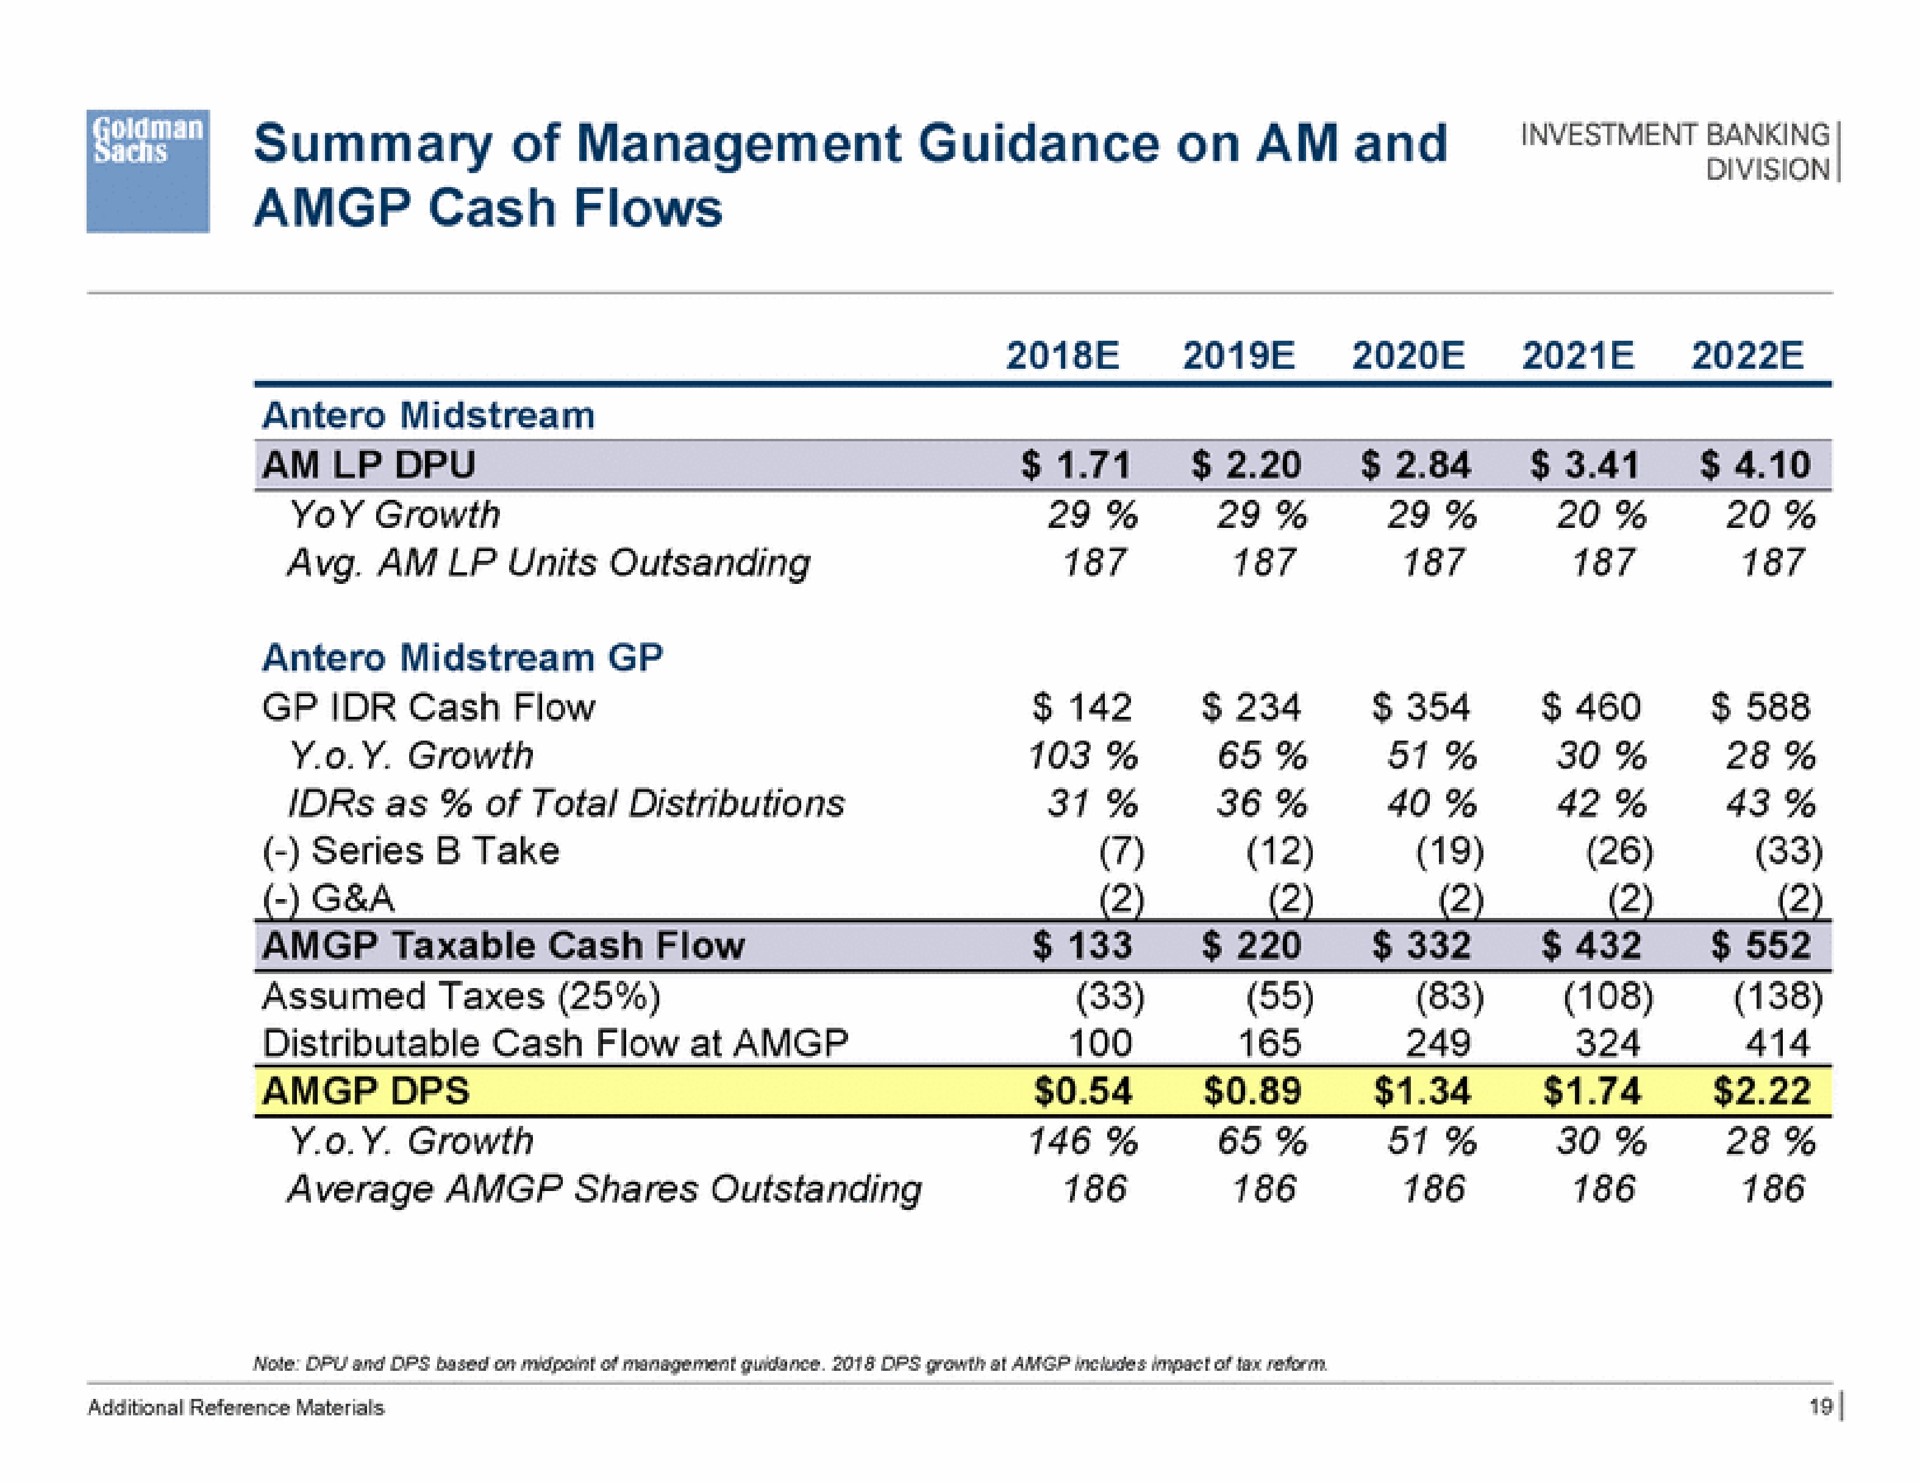 summary of management guidance on am and banking cash flows | Goldman Sachs